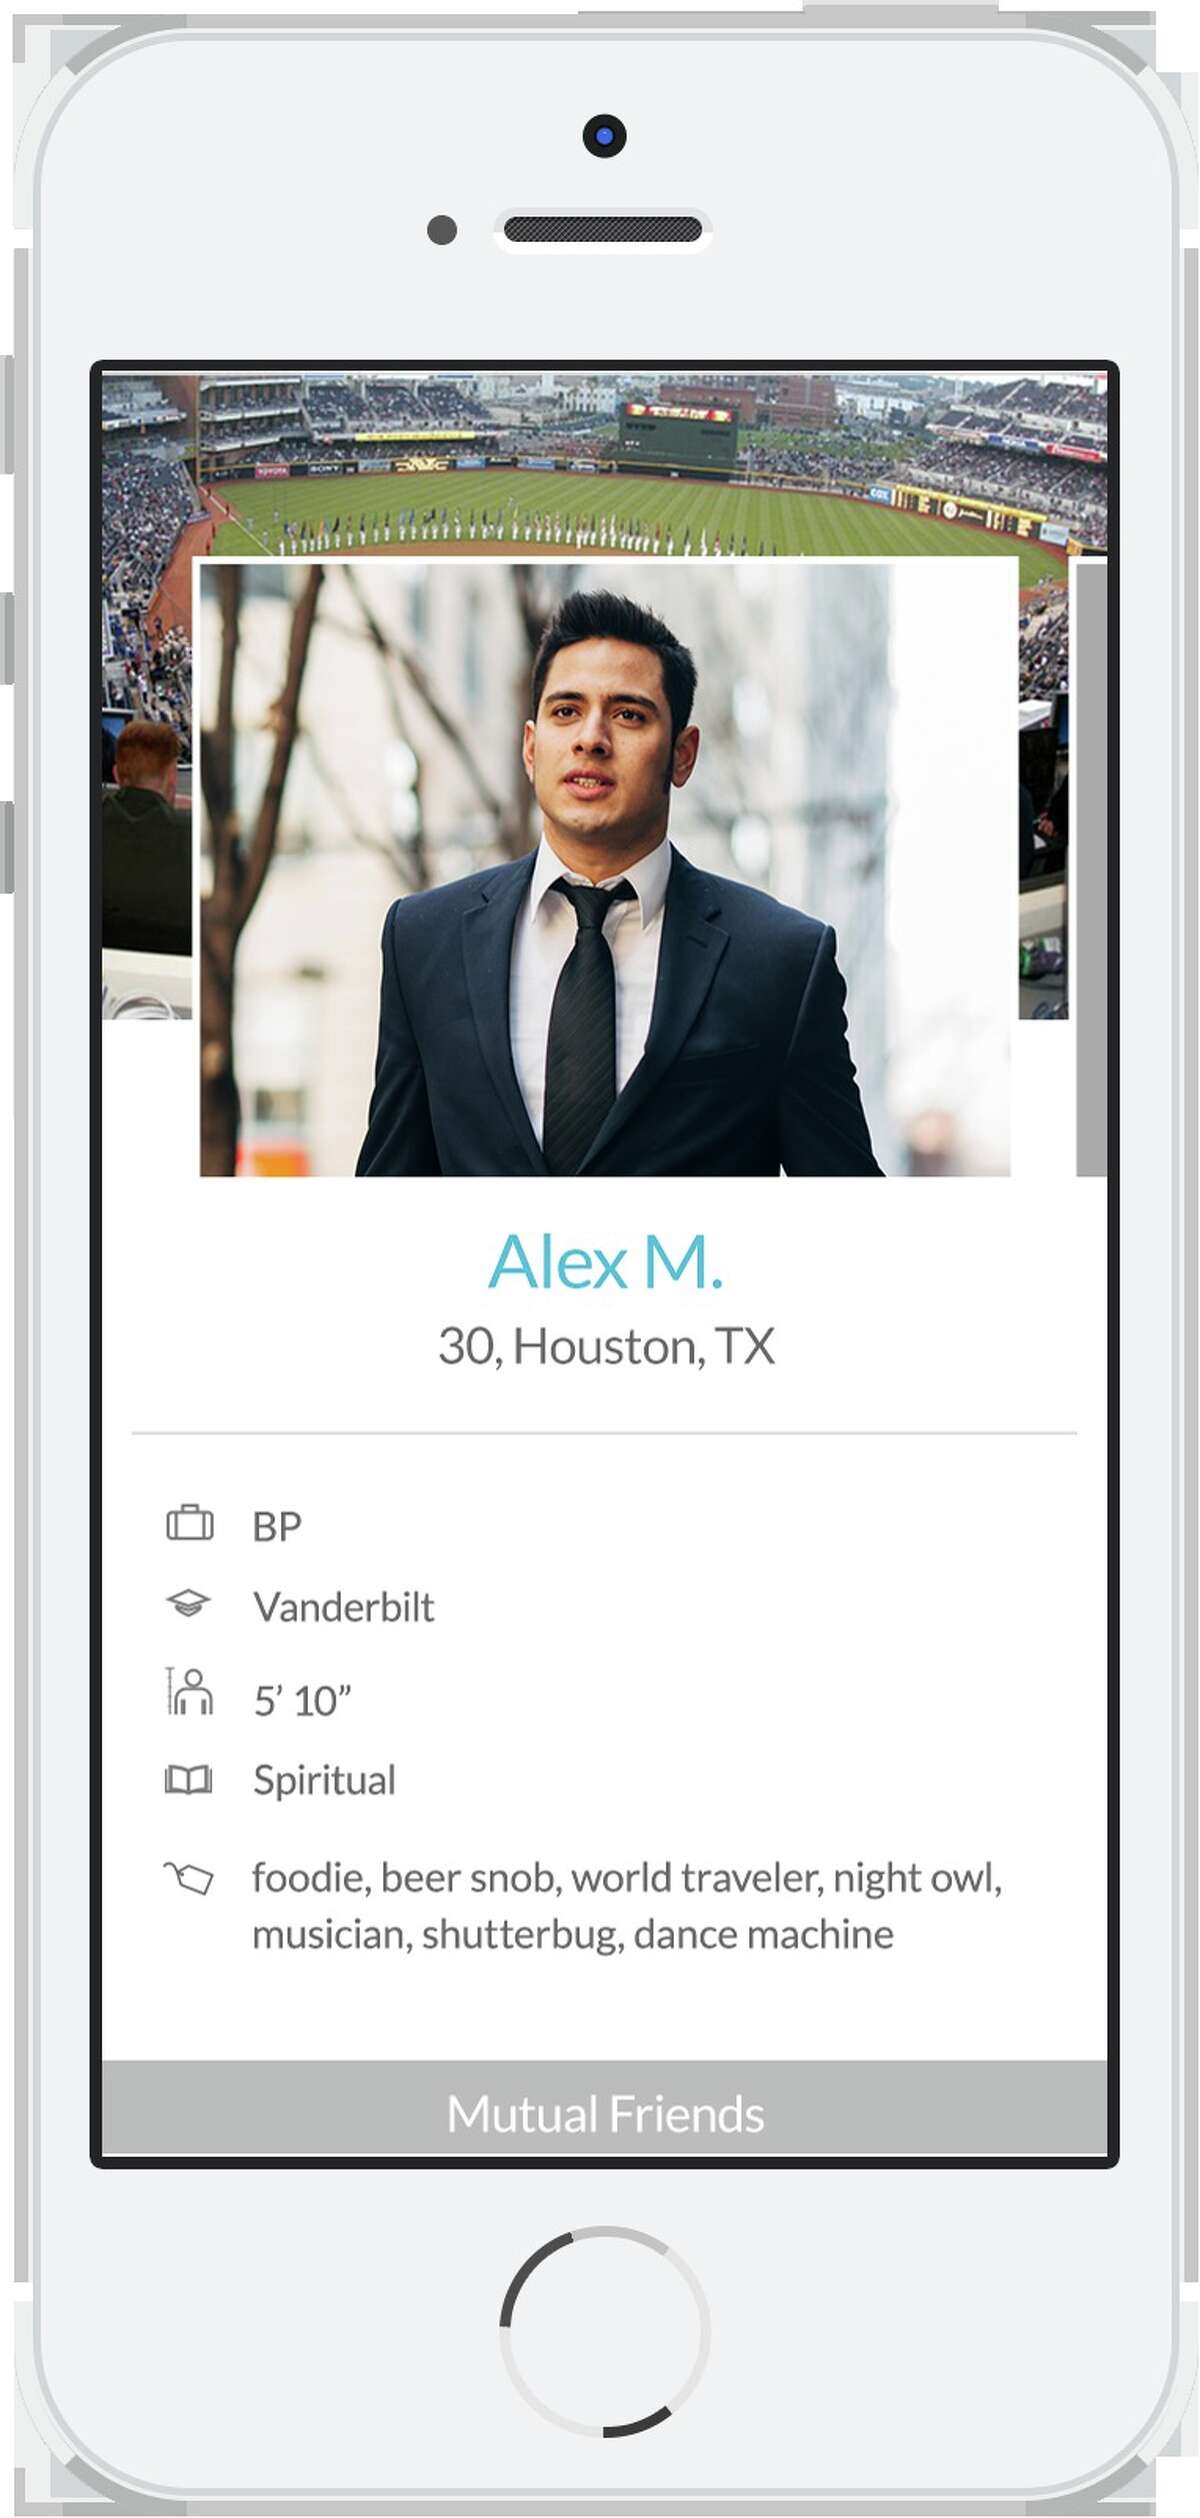 ﻿Hinge lets users see how many mutual Facebook friends they have.